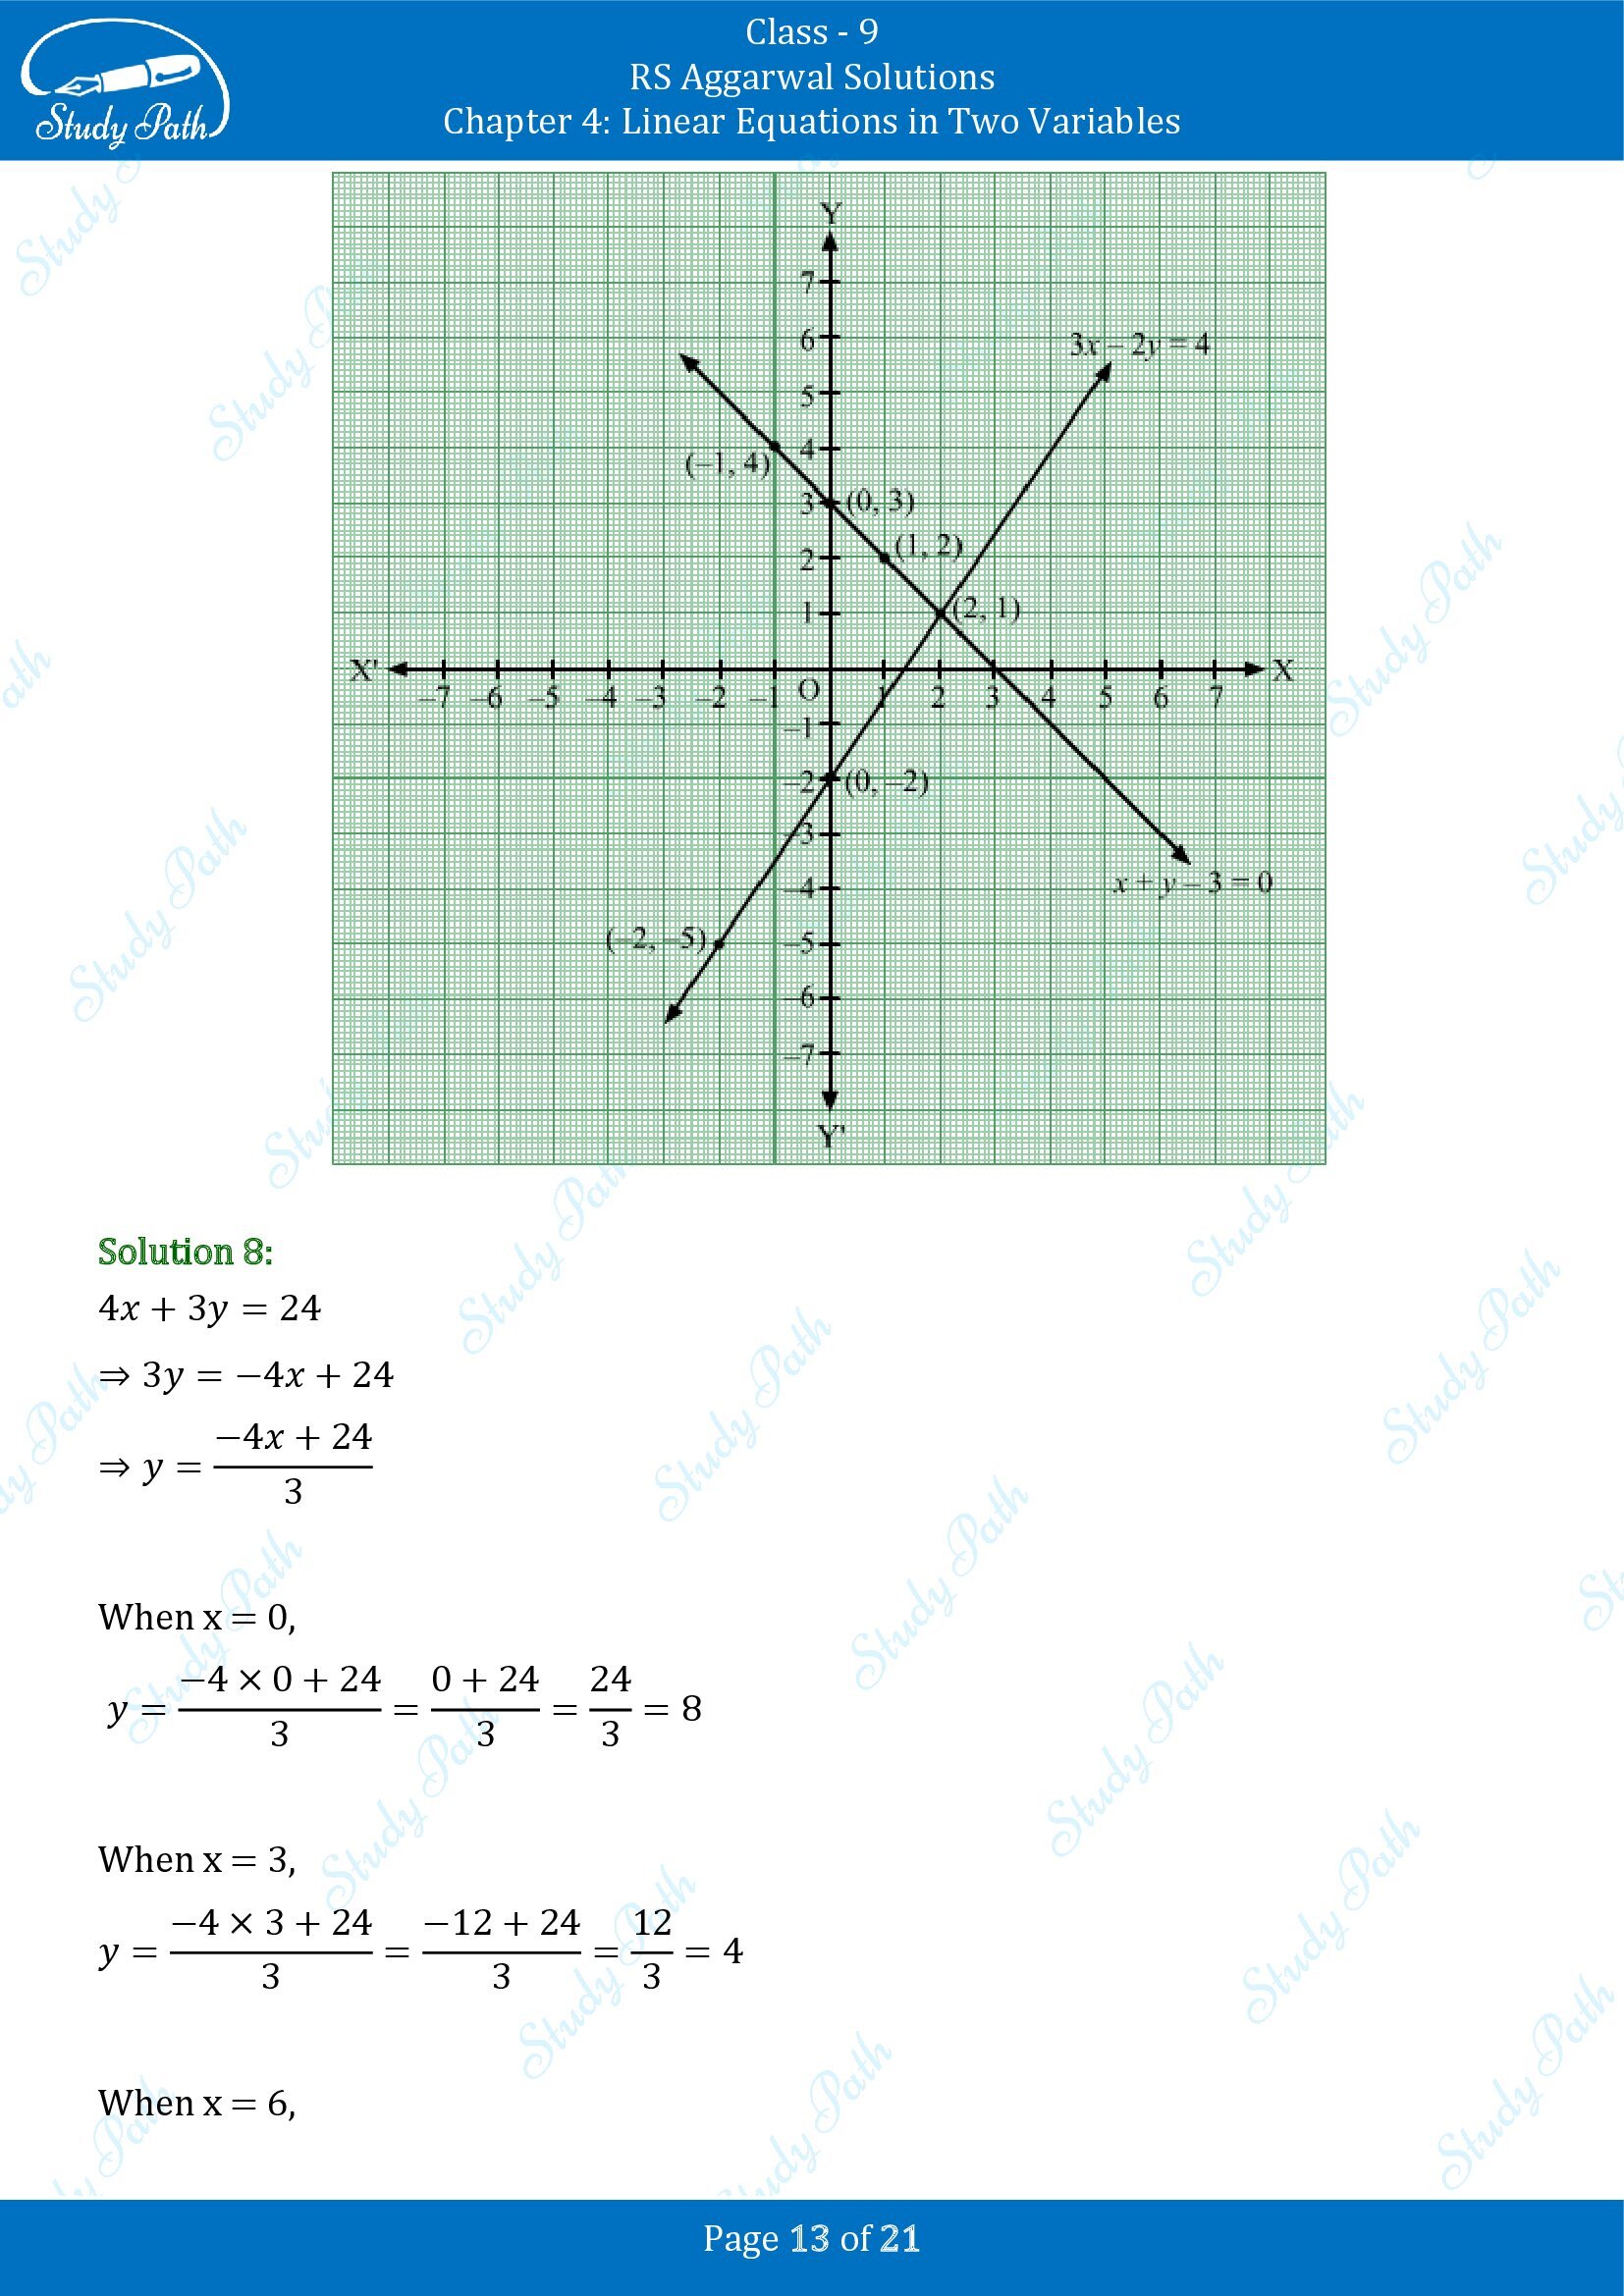 RS Aggarwal Solutions Class 9 Chapter 4 Linear Equations in Two Variables Exercise 4B 00013